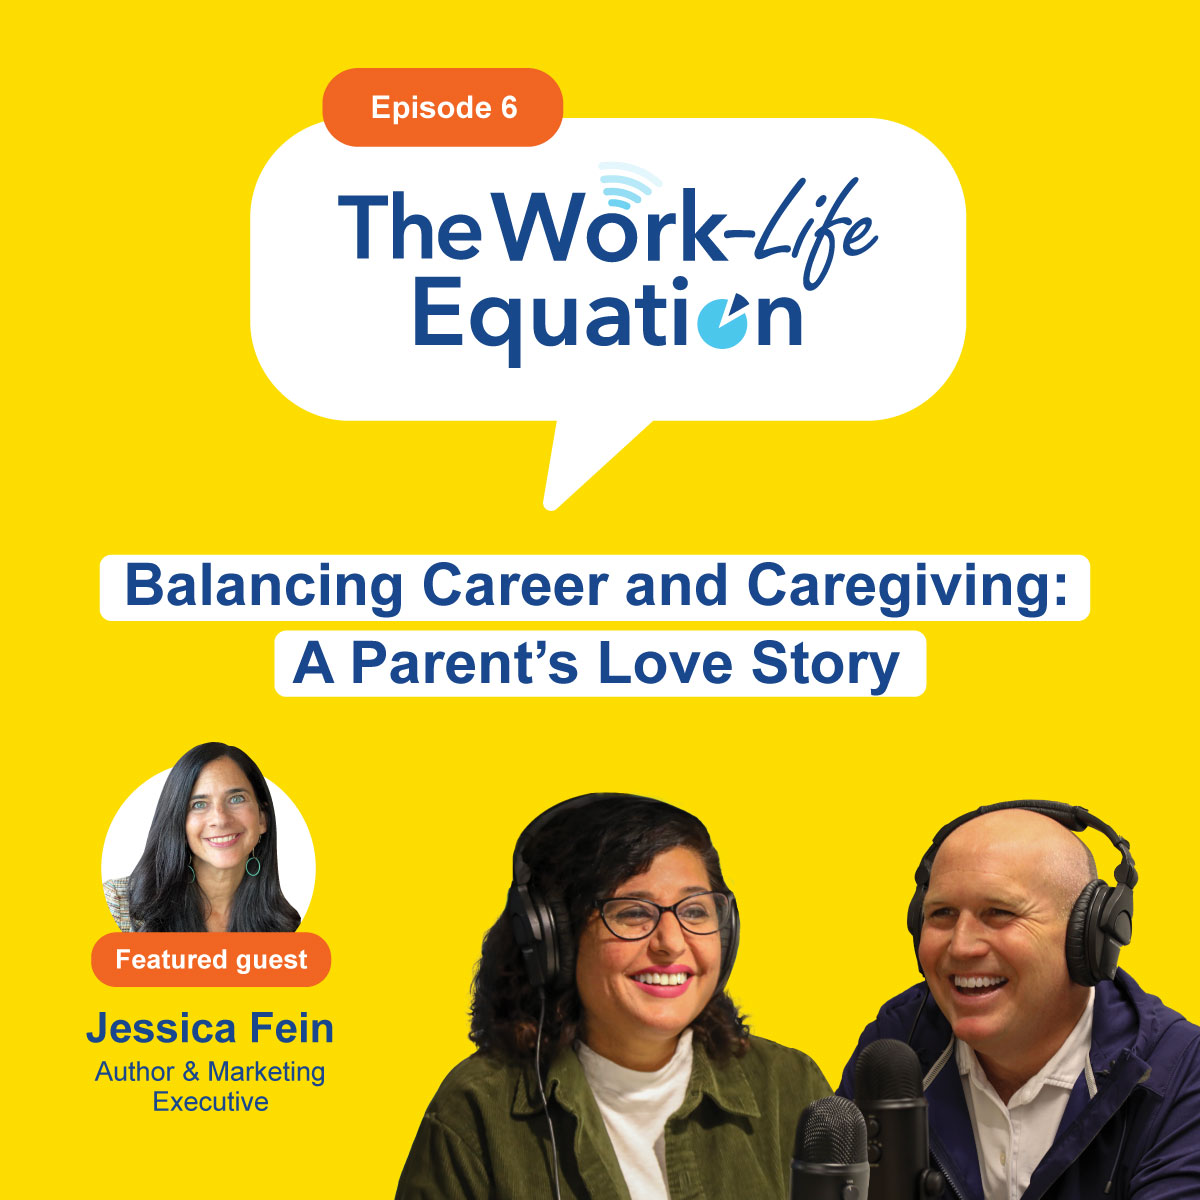 Episode 6 of The Work-Life Equation